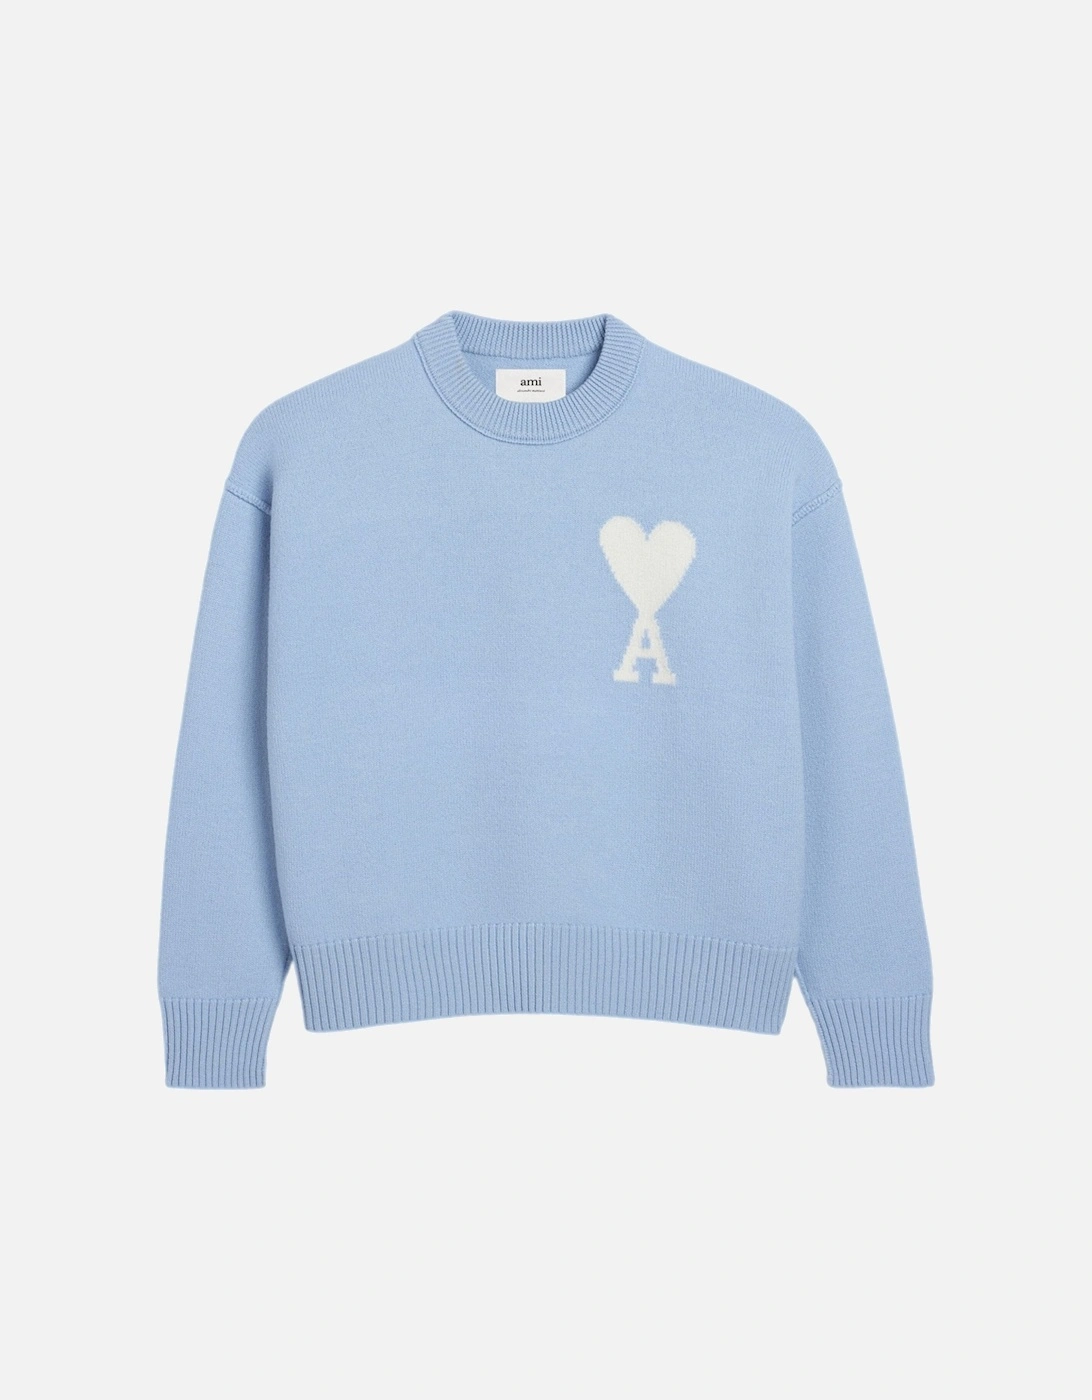 ADC Sweater Sky Blue, 7 of 6